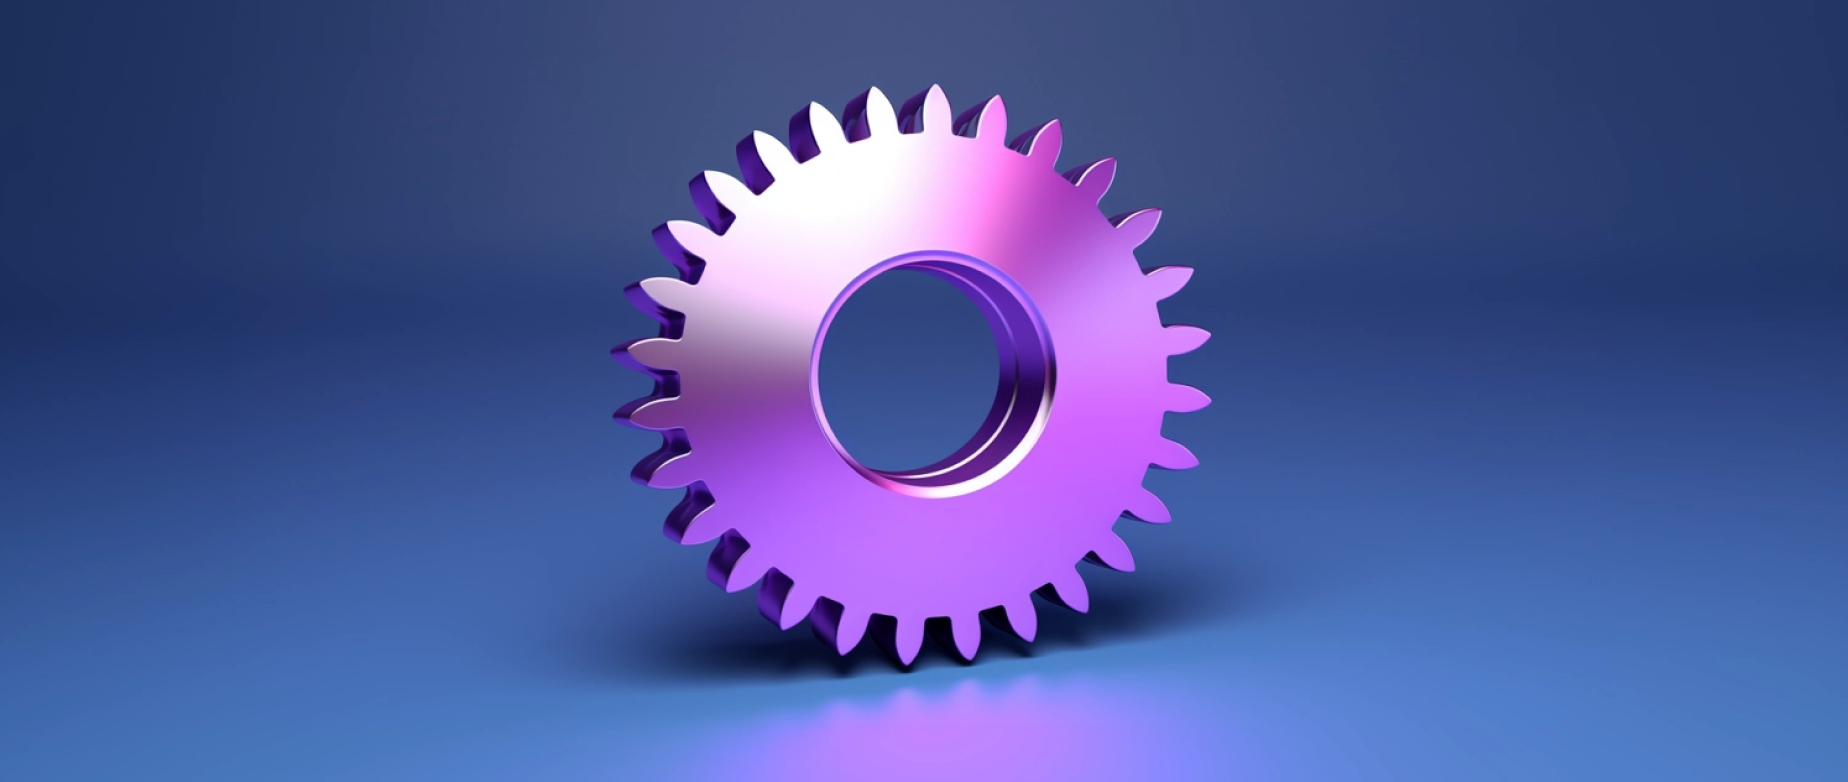 A shiny gear reflecting purple light against a navy background.